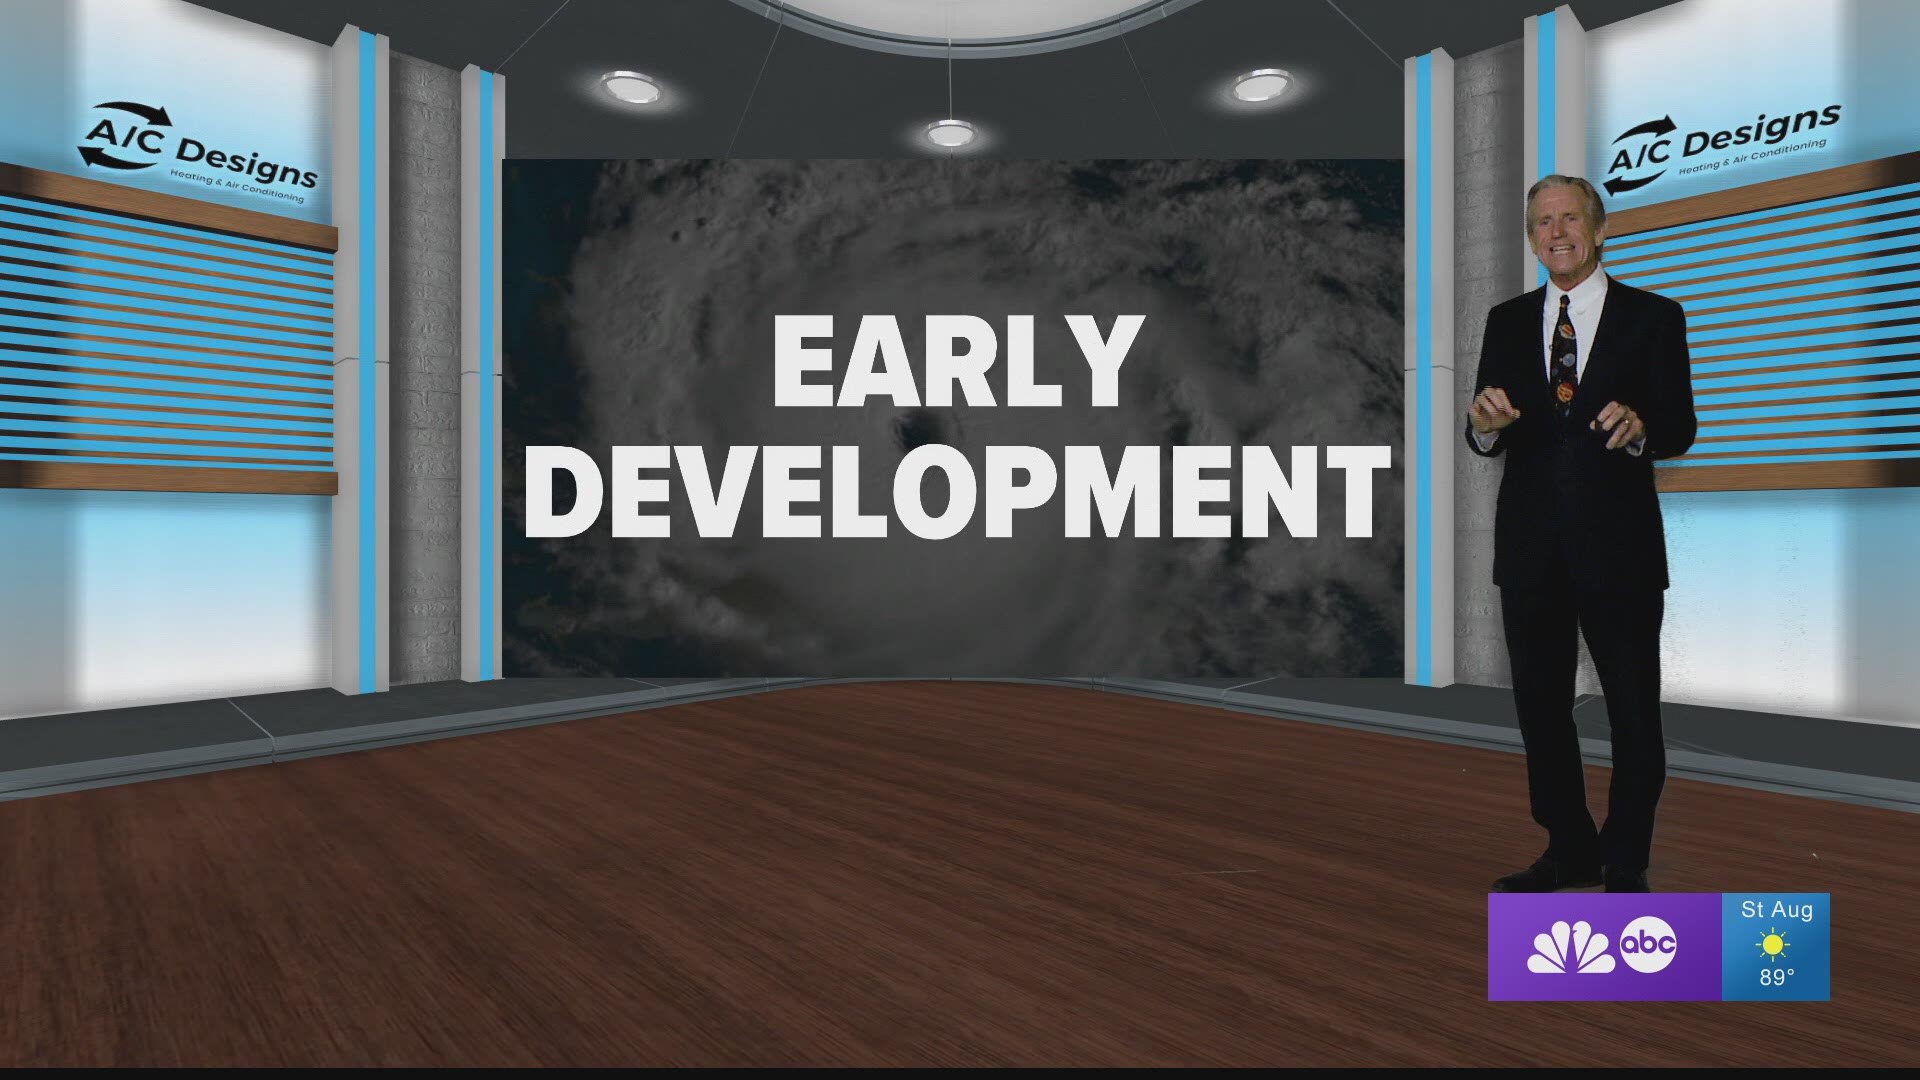 This week, First Coast News Storm Expert Tim Deegan dives deep into the early stages of a developing cyclone and that factors that can take a cluster of thunderstorms into a Category 1 Hurricane.